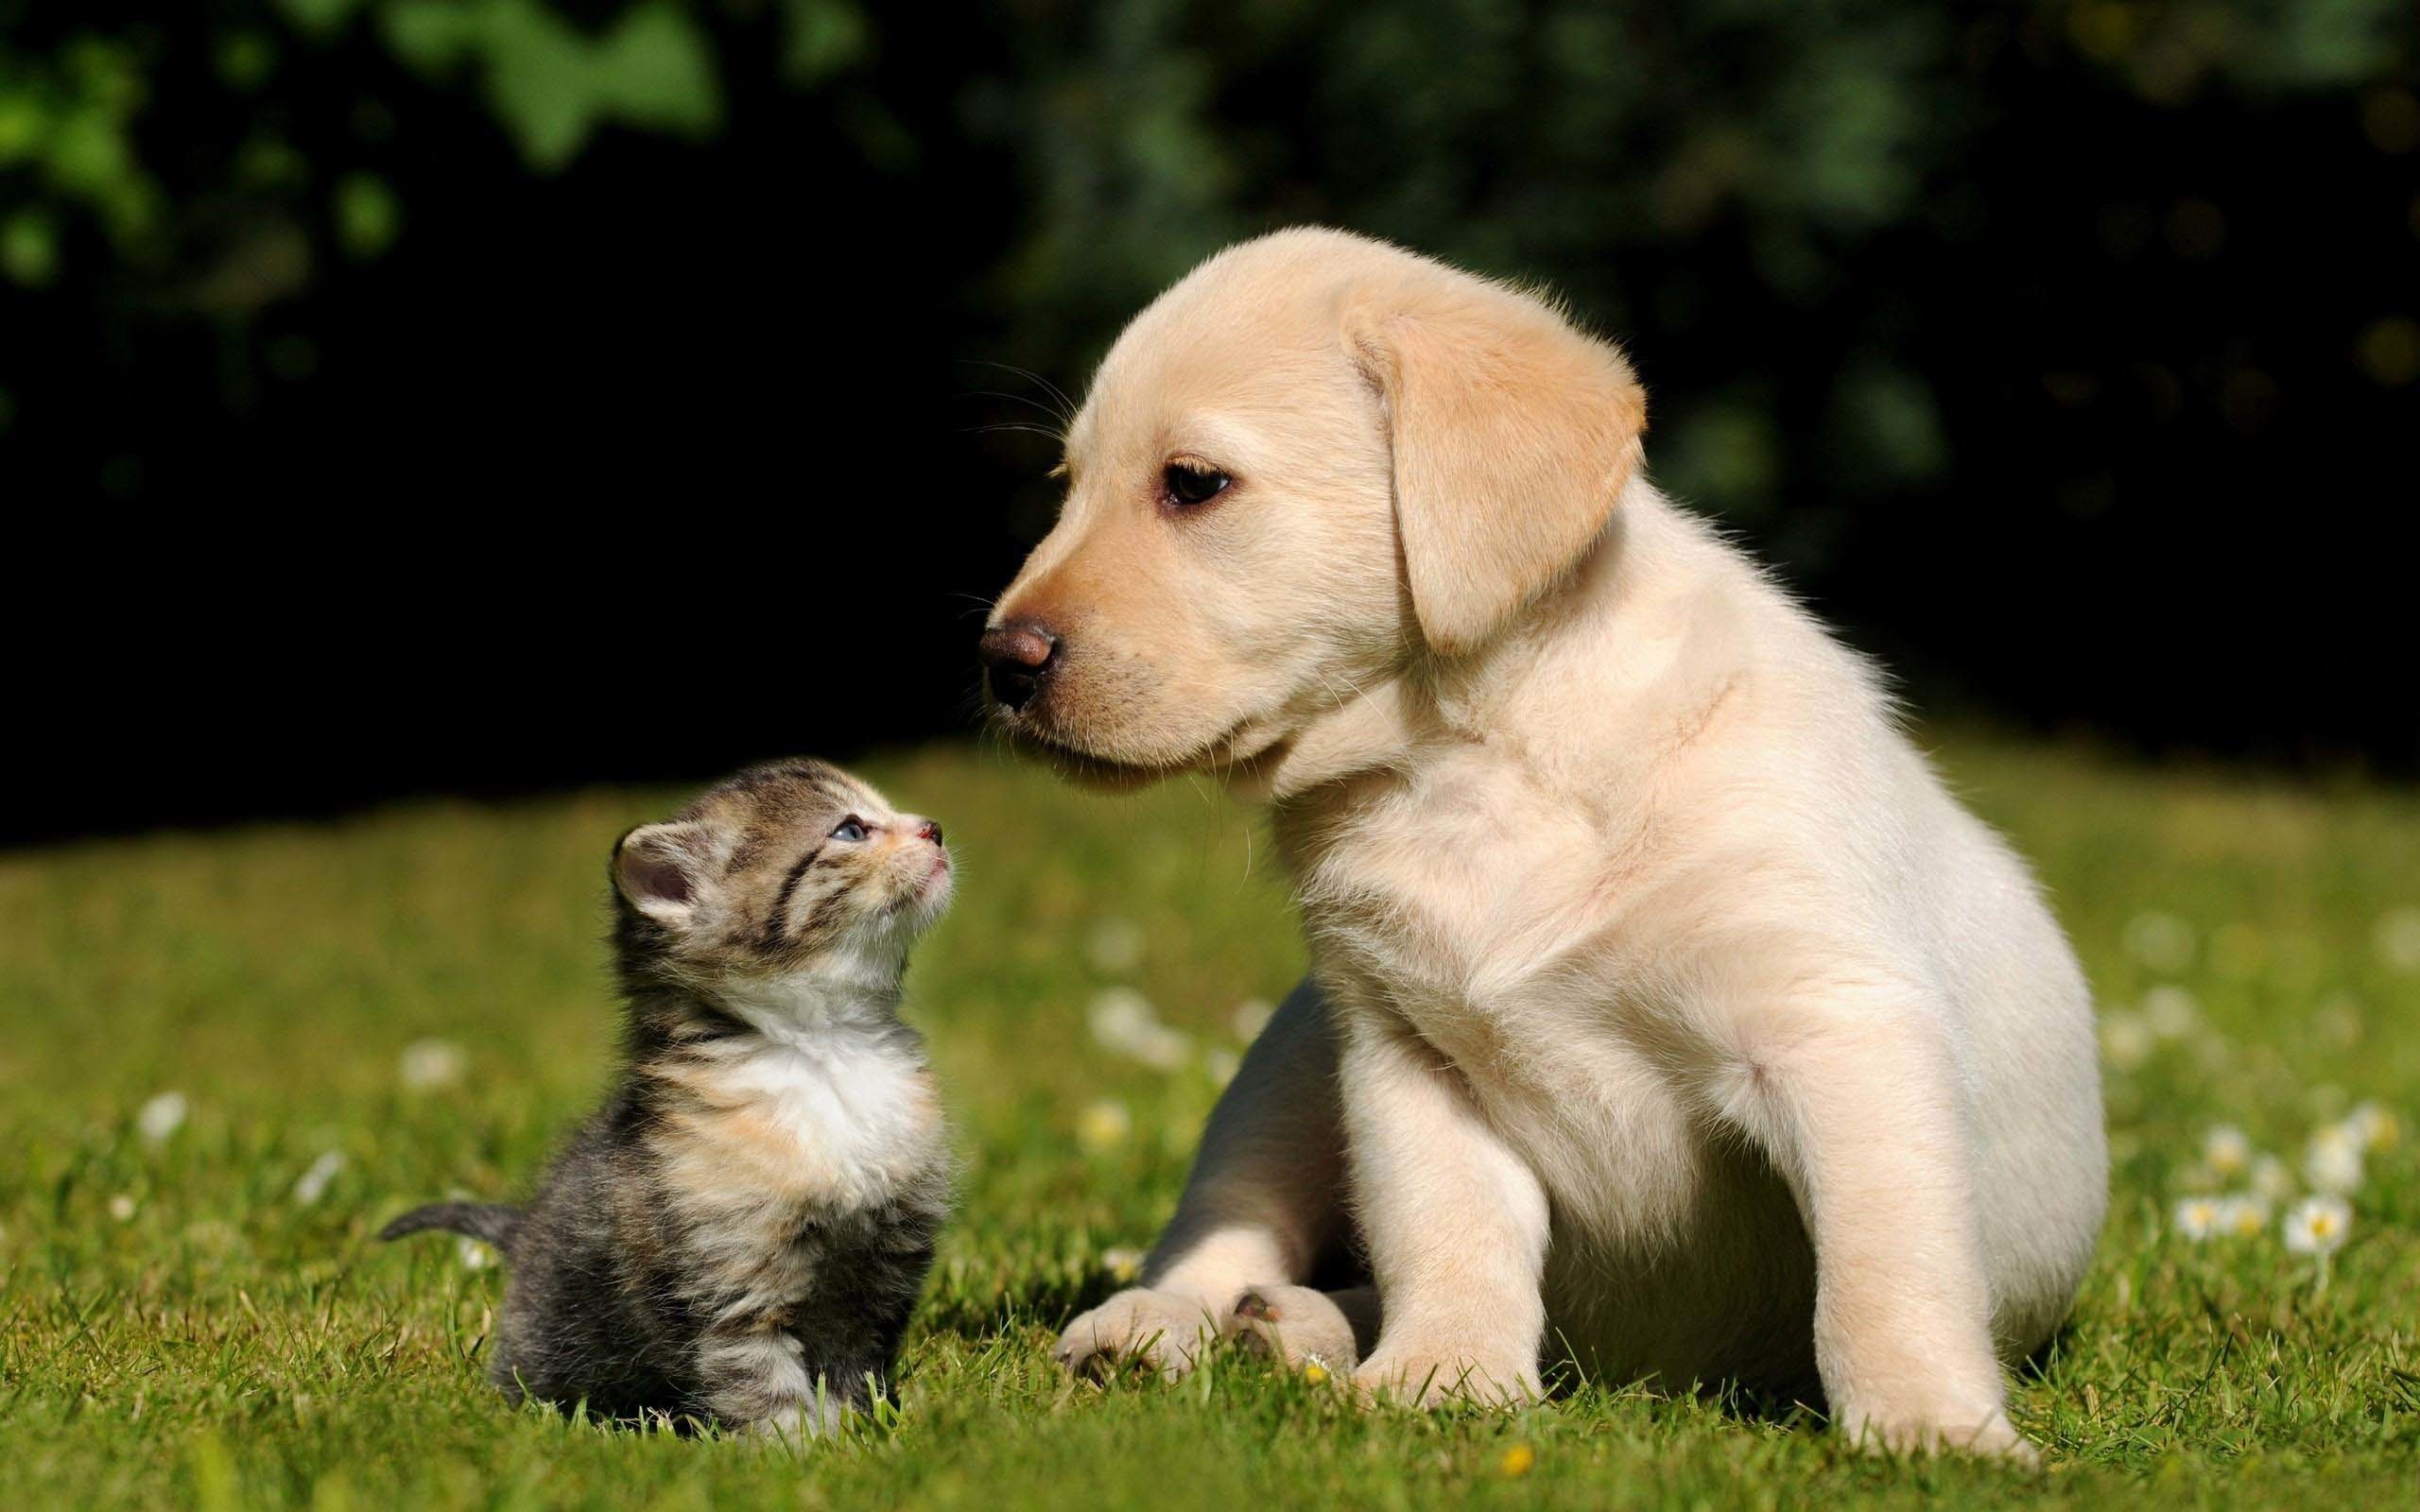 2560x1600 cute dog and cat sitting wallpaper.